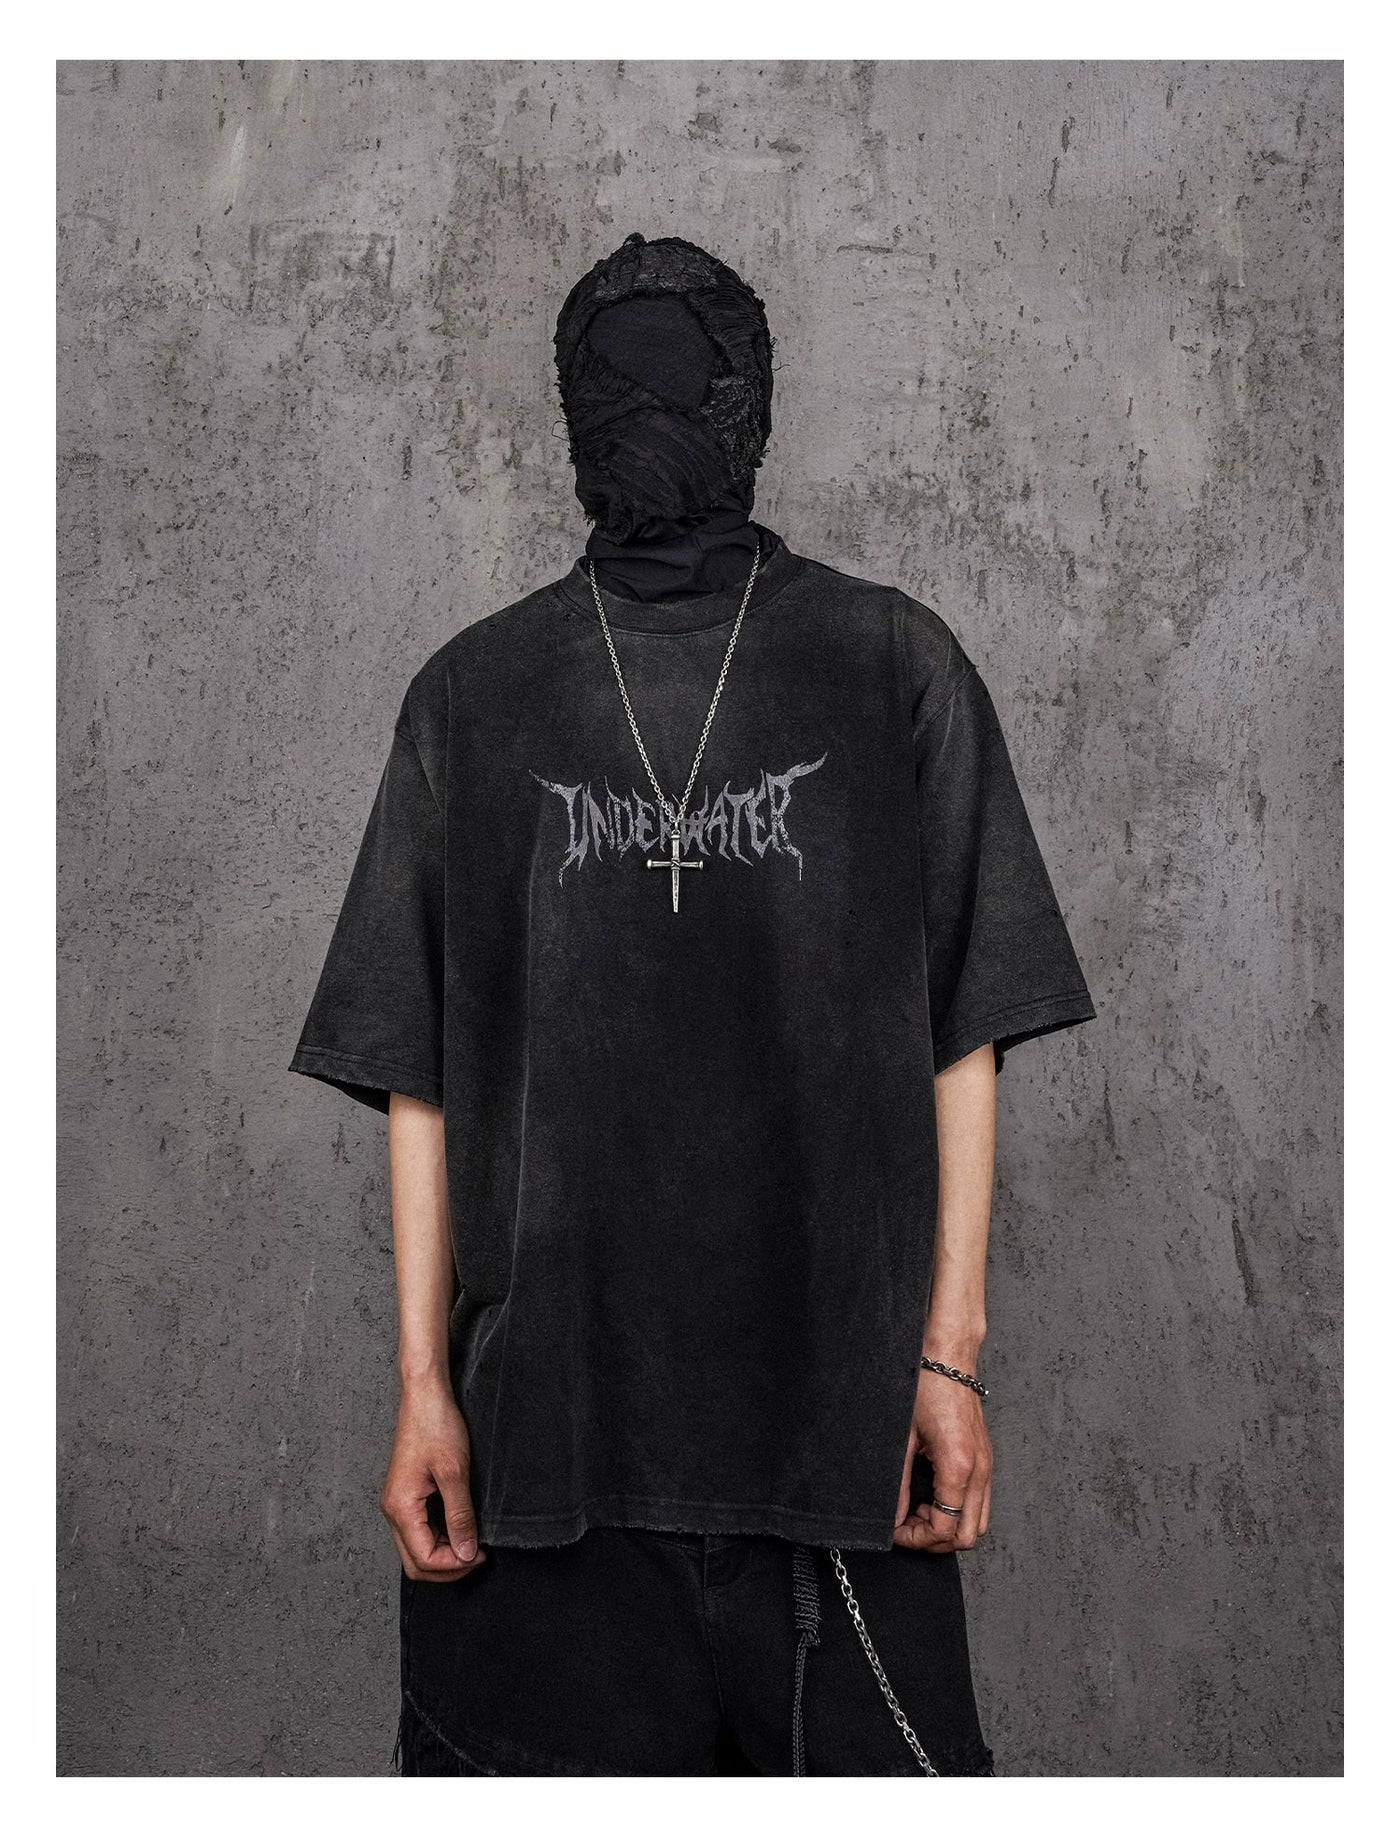 Grunged and Washed T-Shirt Korean Street Fashion T-Shirt By Underwater Shop Online at OH Vault